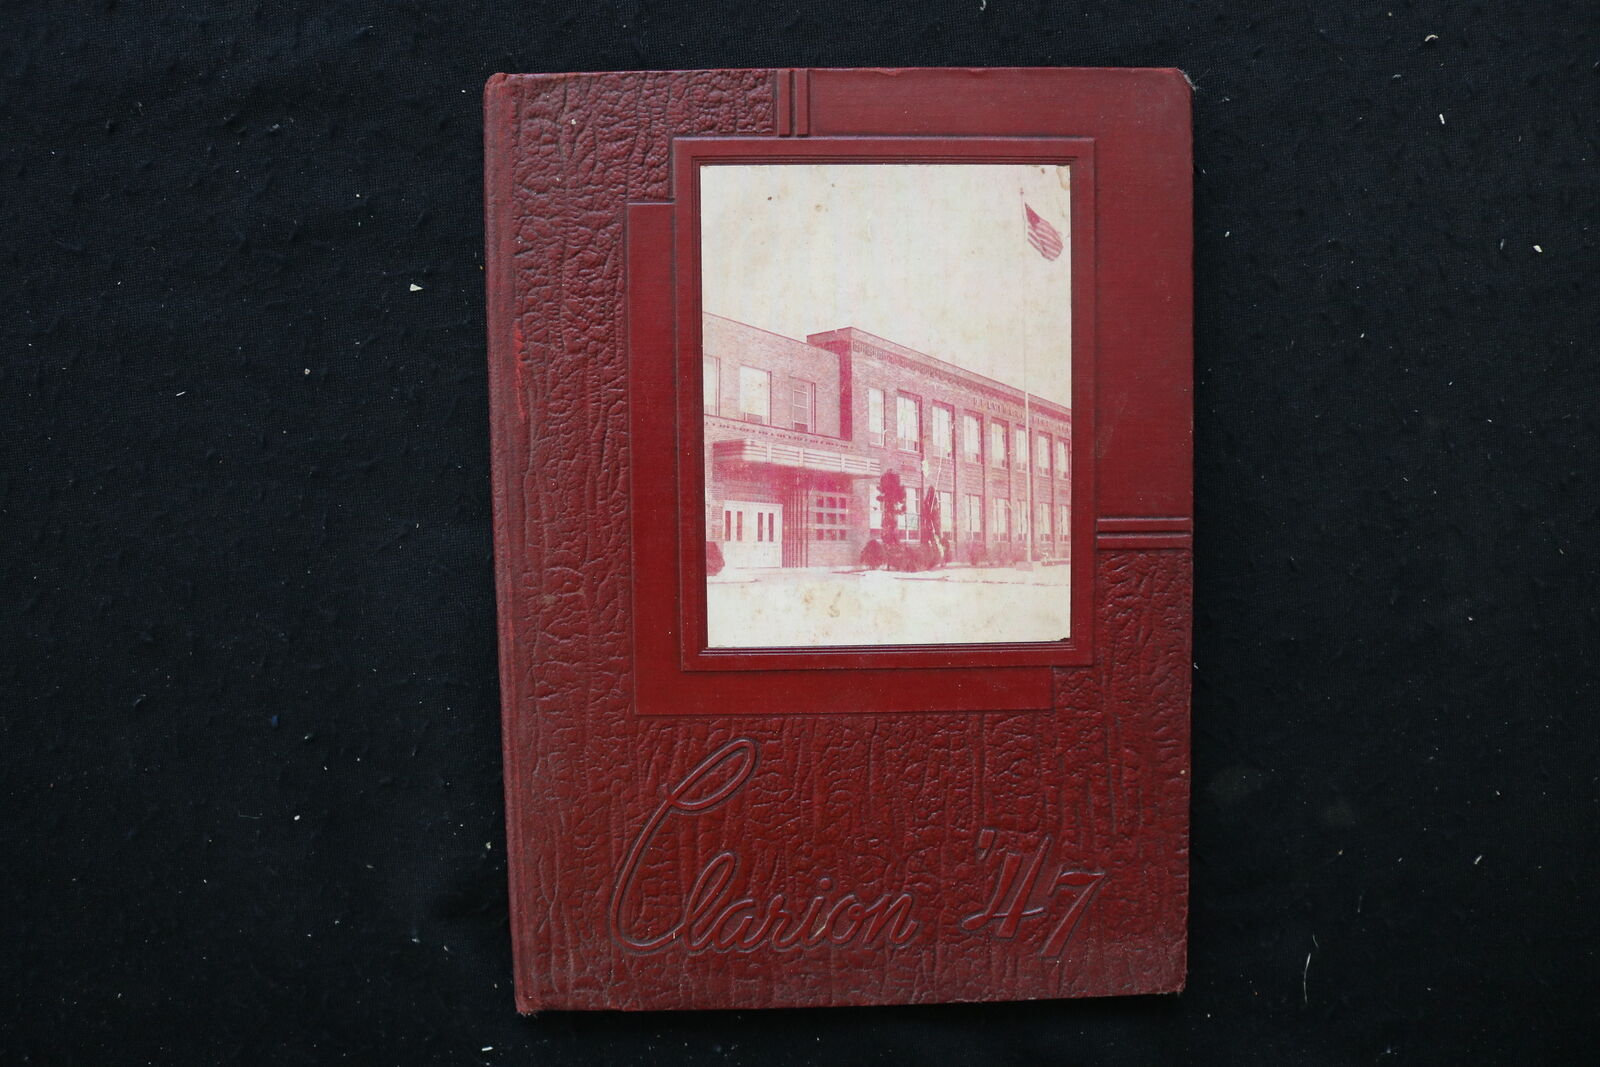 1947 THE CLARION BELVIDERE HIGH SCHOOL YEARBOOK - BELVIDERE, NEW JERSEY- YB 3434